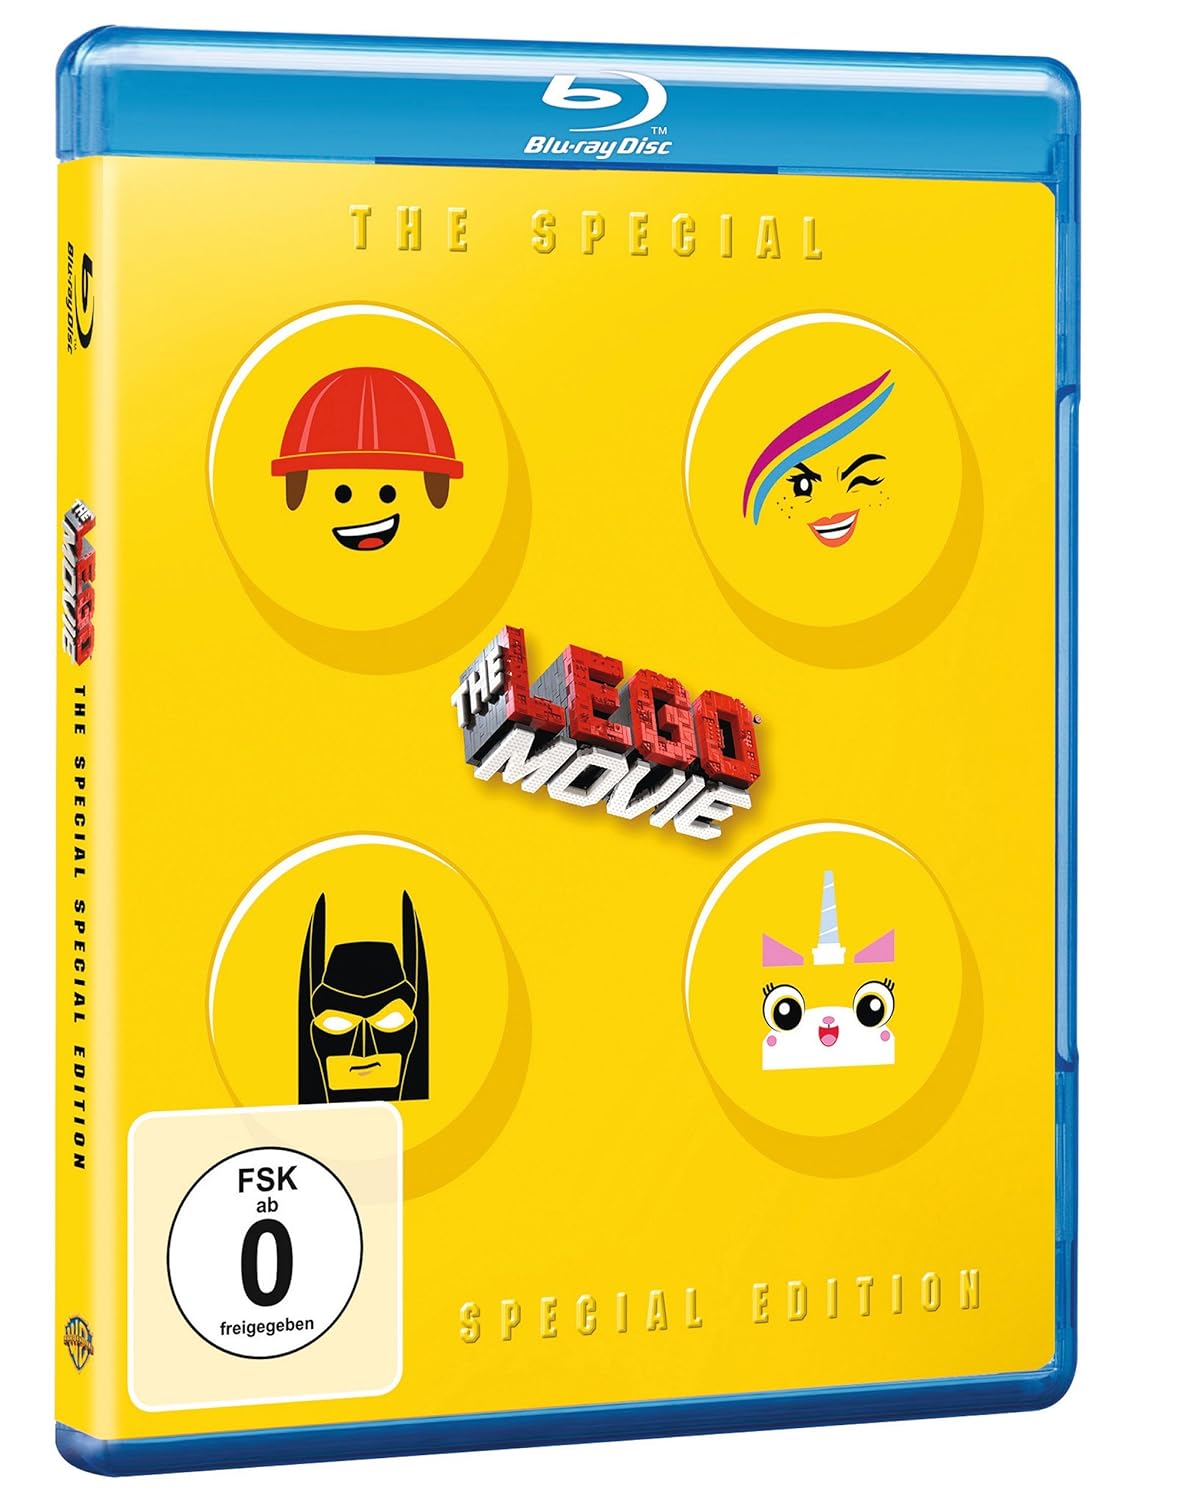 Lego – The Movie [Blu-ray] [Special Edition]